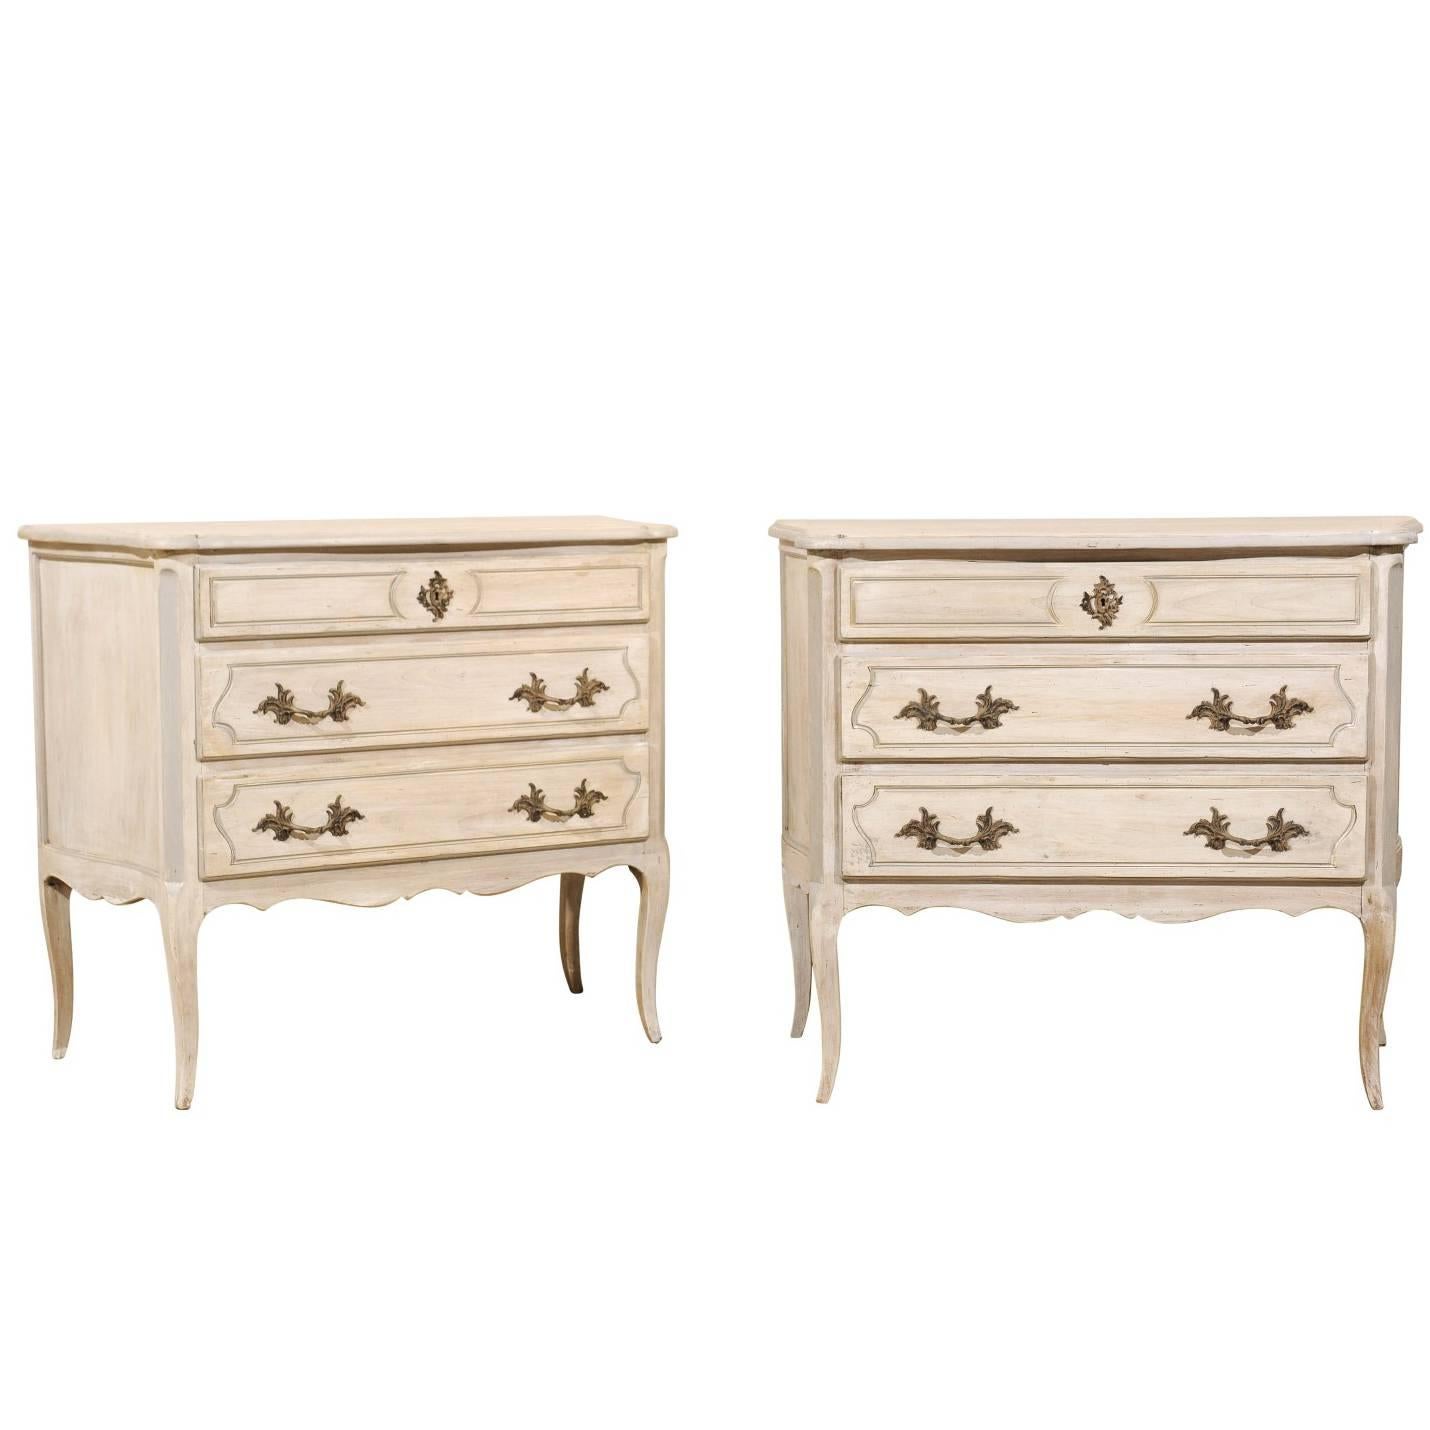 Pair of Vintage Three-Drawer Raised Chests, American with Rococo Style Hardware